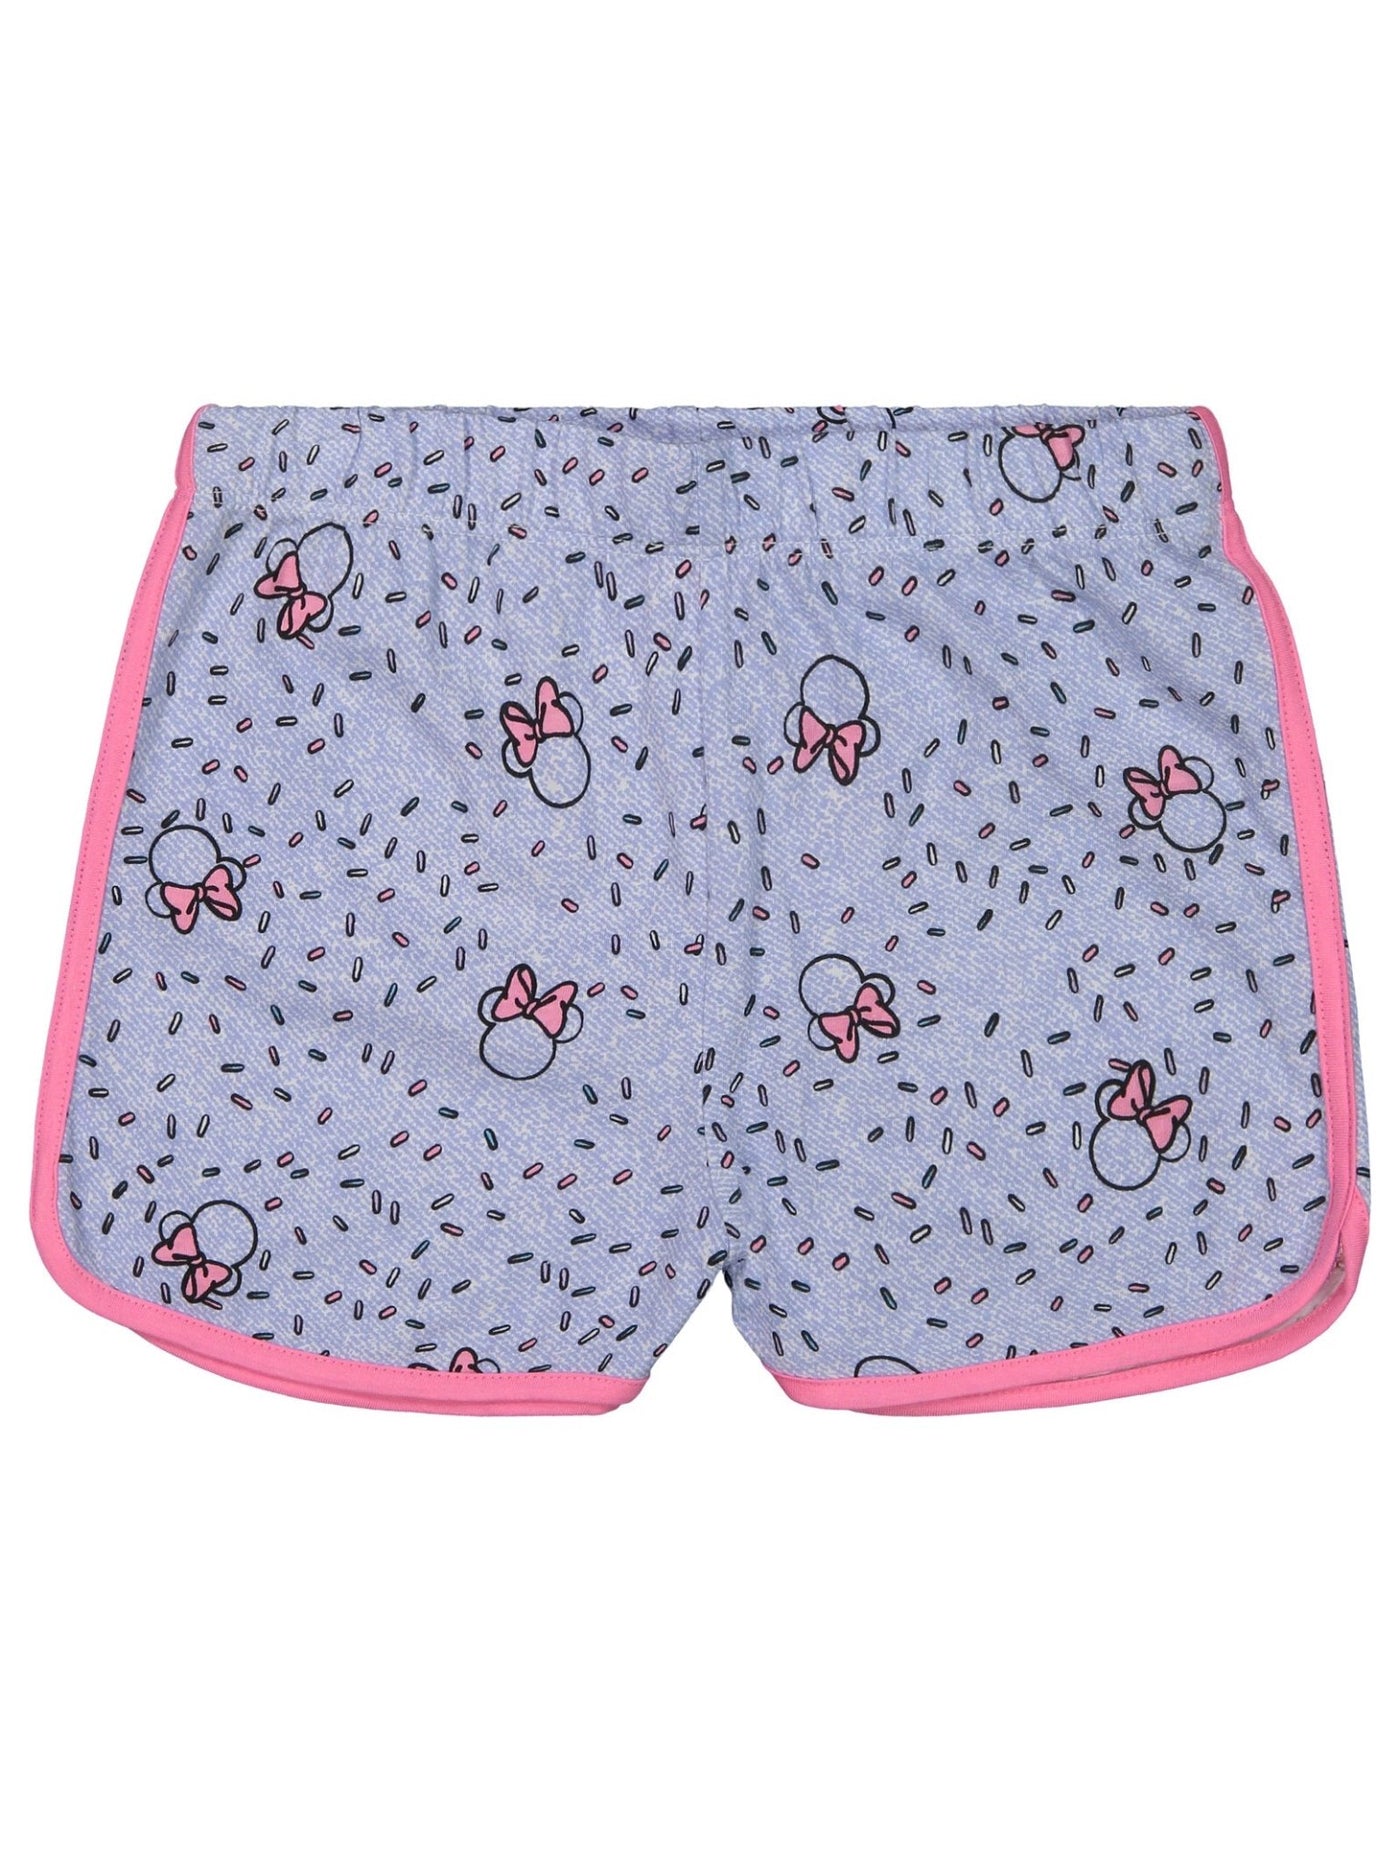 Disney Minnie Mouse T-Shirts Leggings and Dolphin Shorts 4 Piece Outfit Set - imagikids